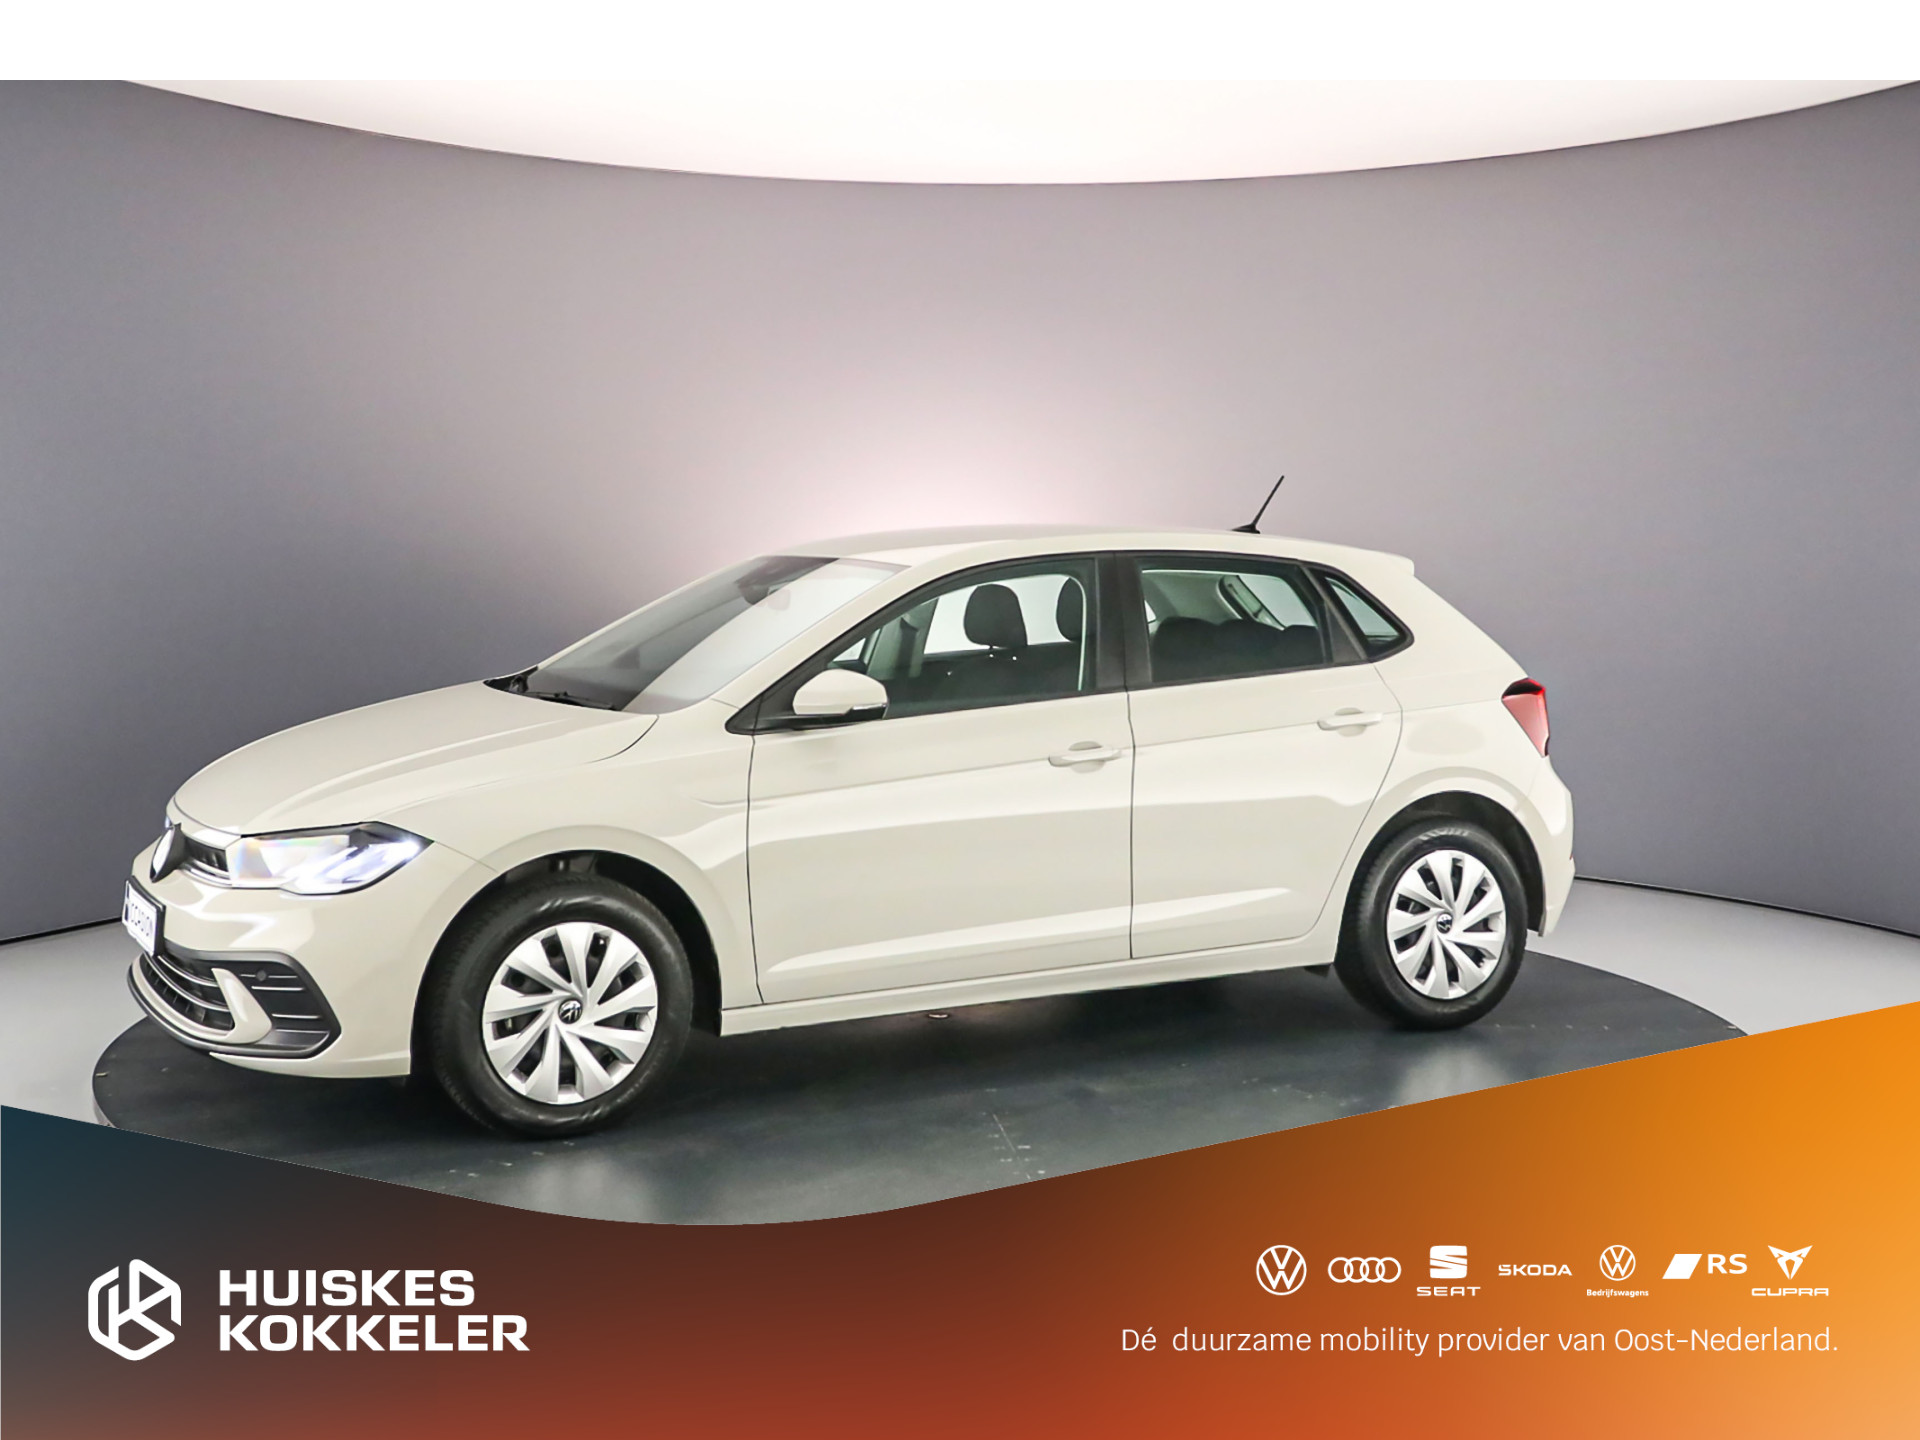 Volkswagen Polo Polo 1.0 MPI 80pk Cruise control, Airco, App connect, DAB, Radio, Bluetooth, LED verlichting